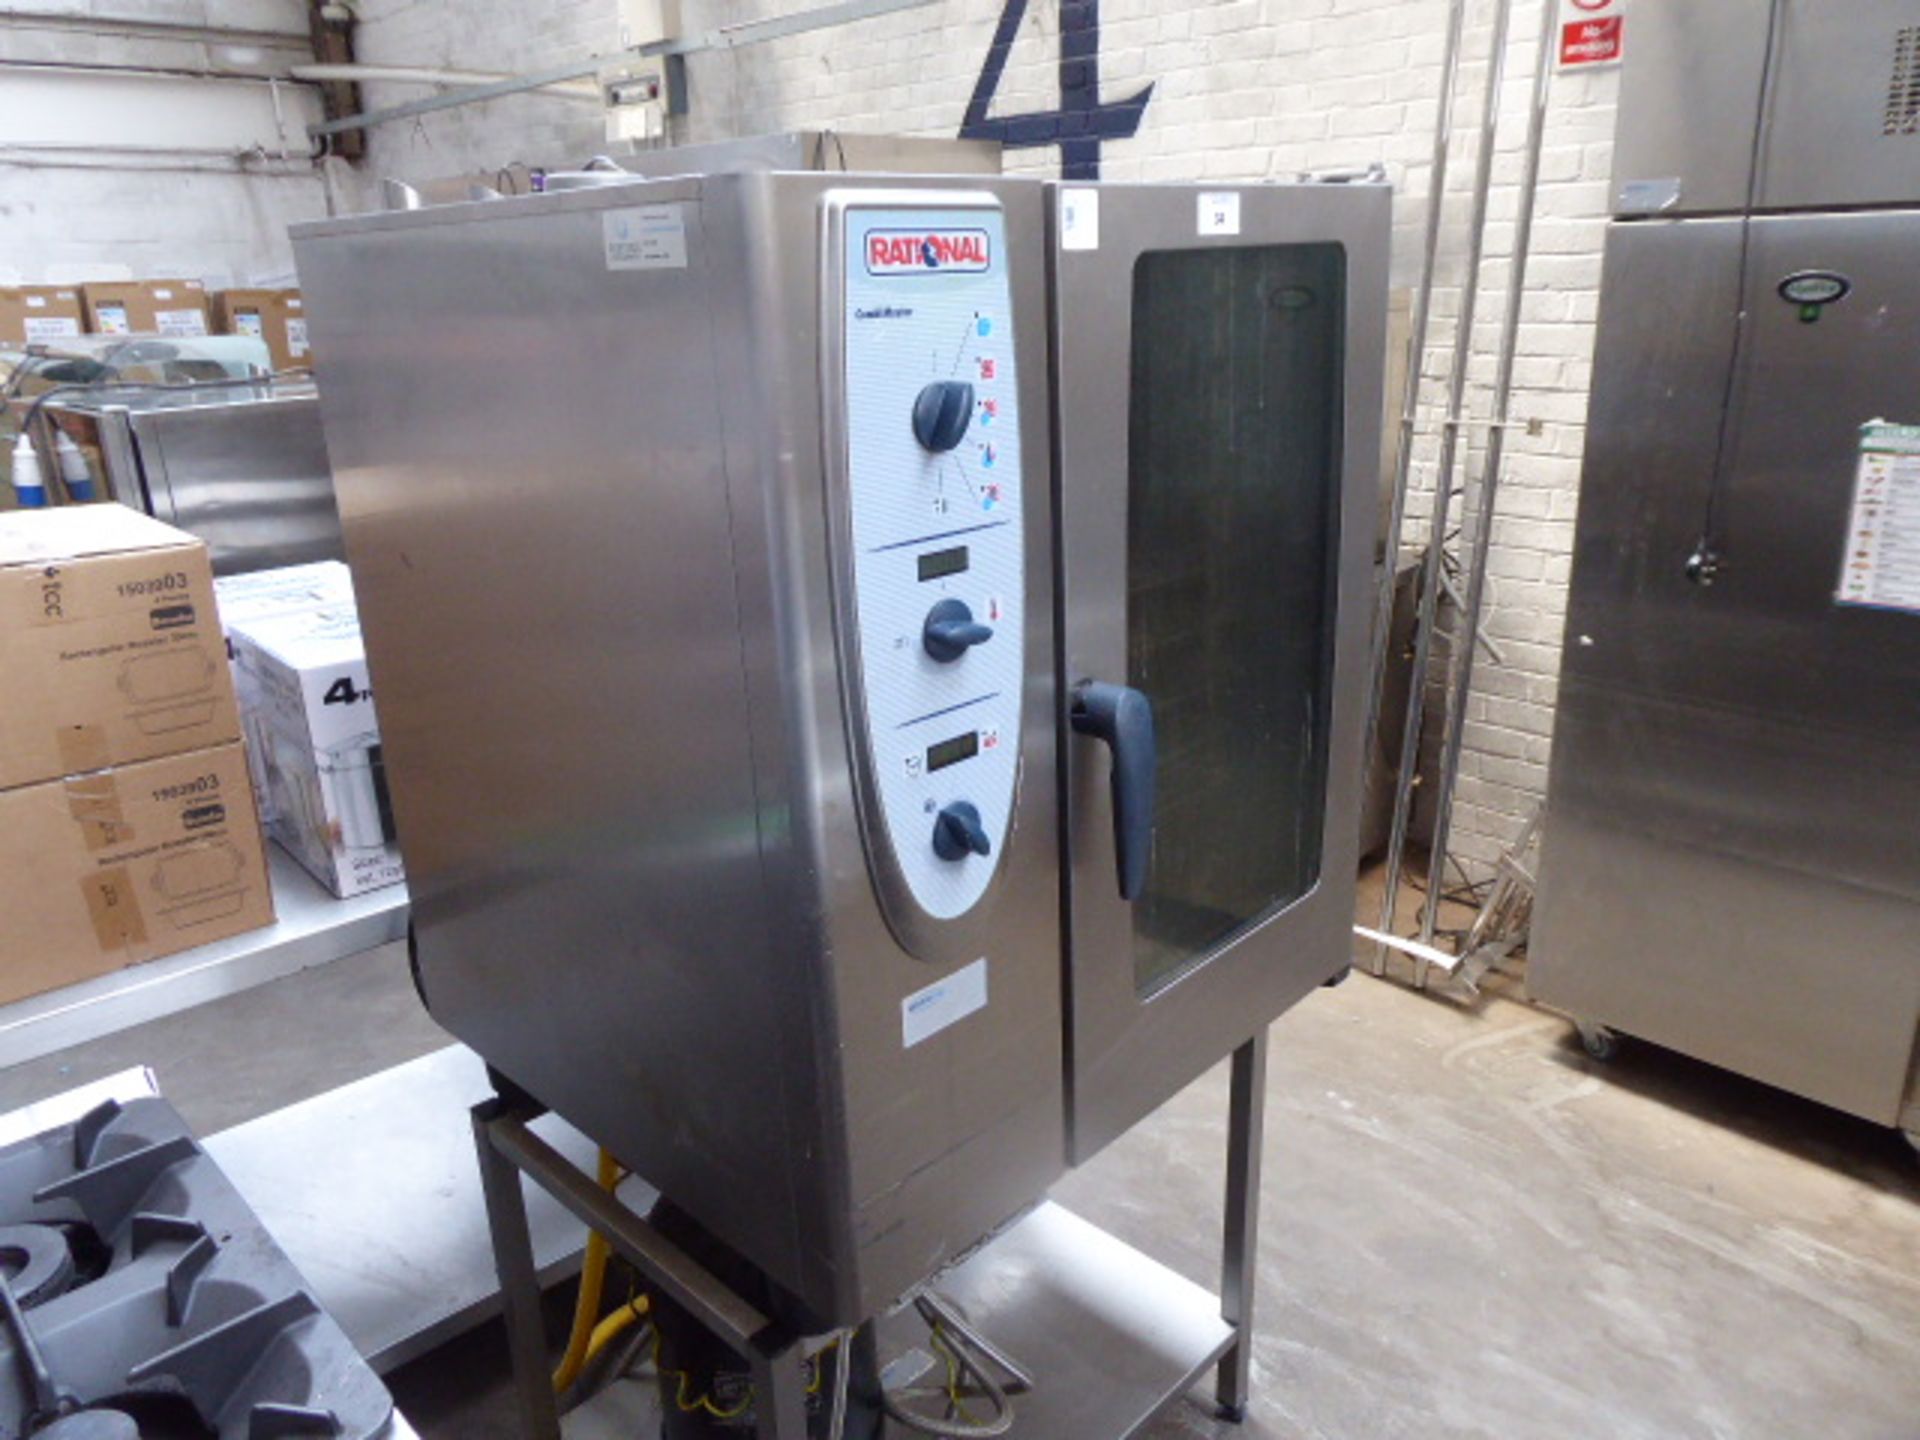 84cm electric Rational CombiMaster combination oven on stand